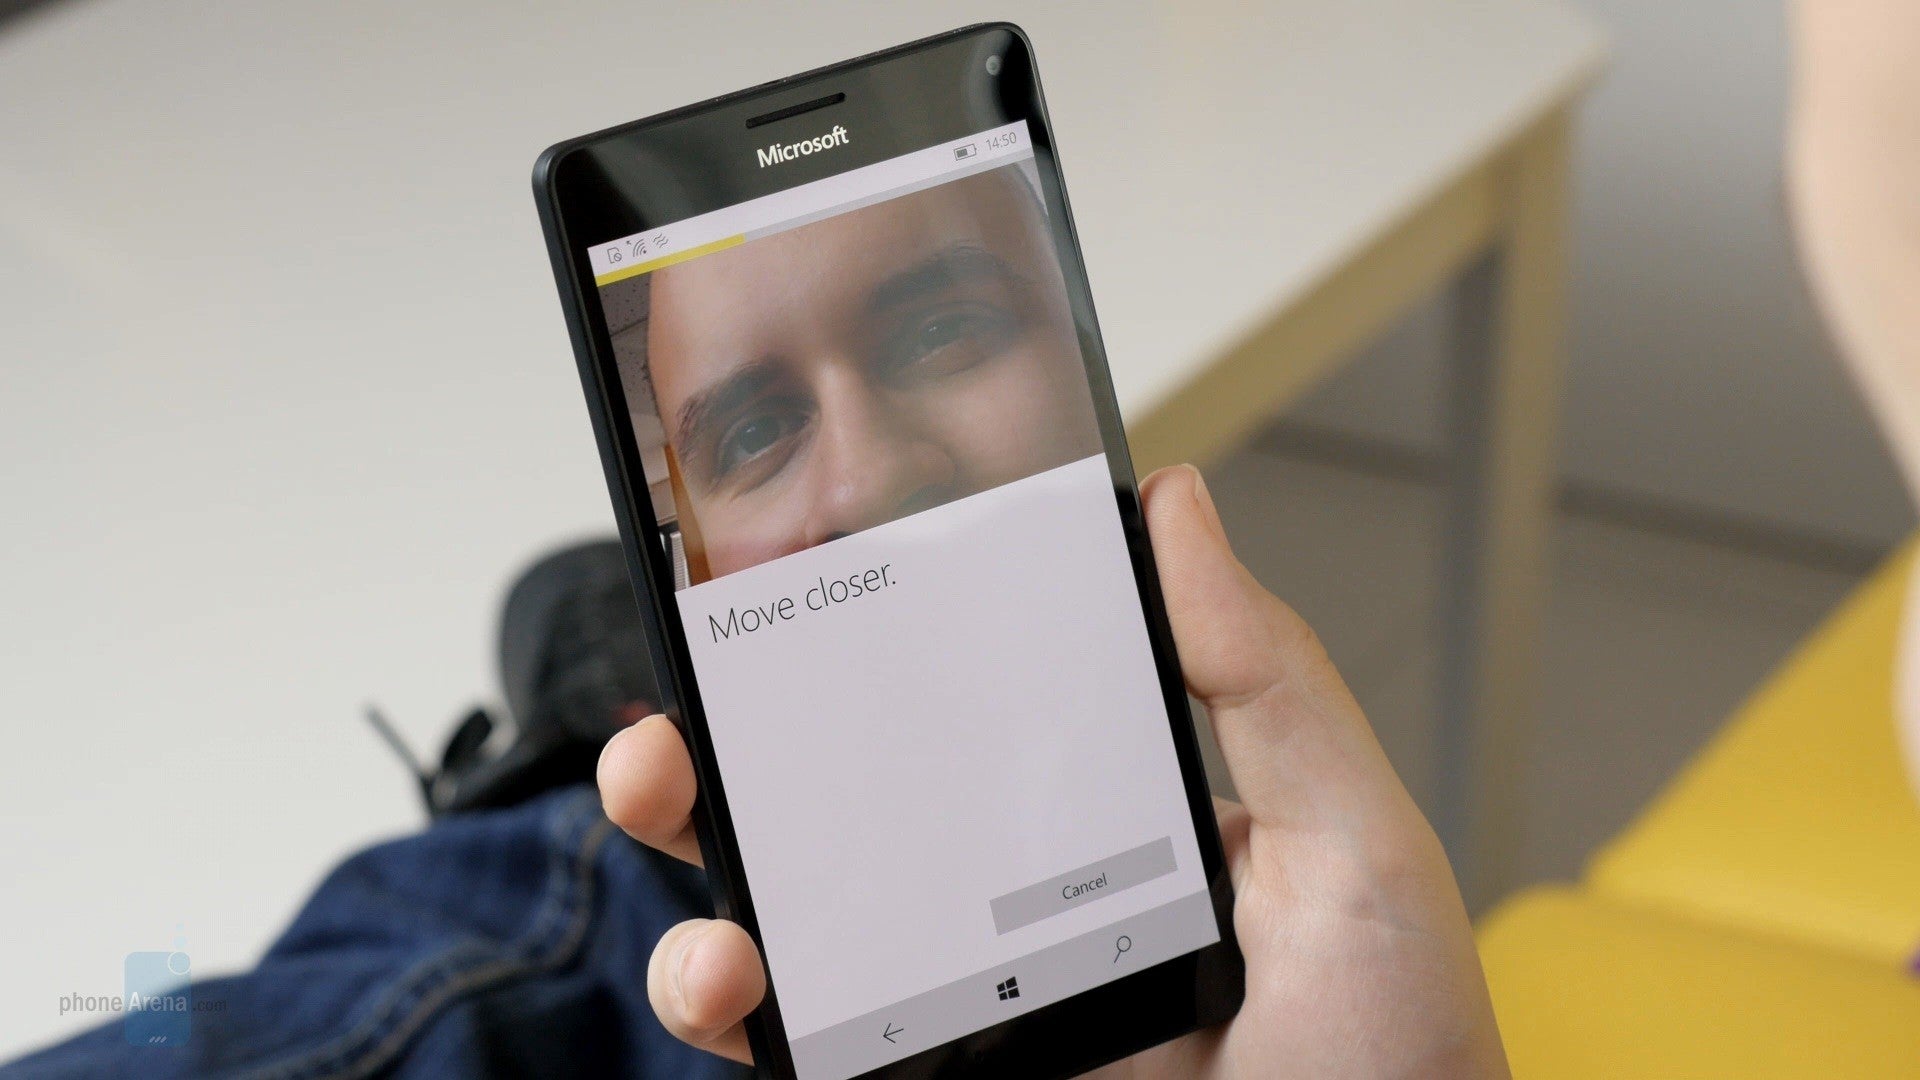 Iris scanning in action on the Lumia 950 XL. - The Galaxy S7 and LG G5 may have iris scanners, so what does that mean for you?